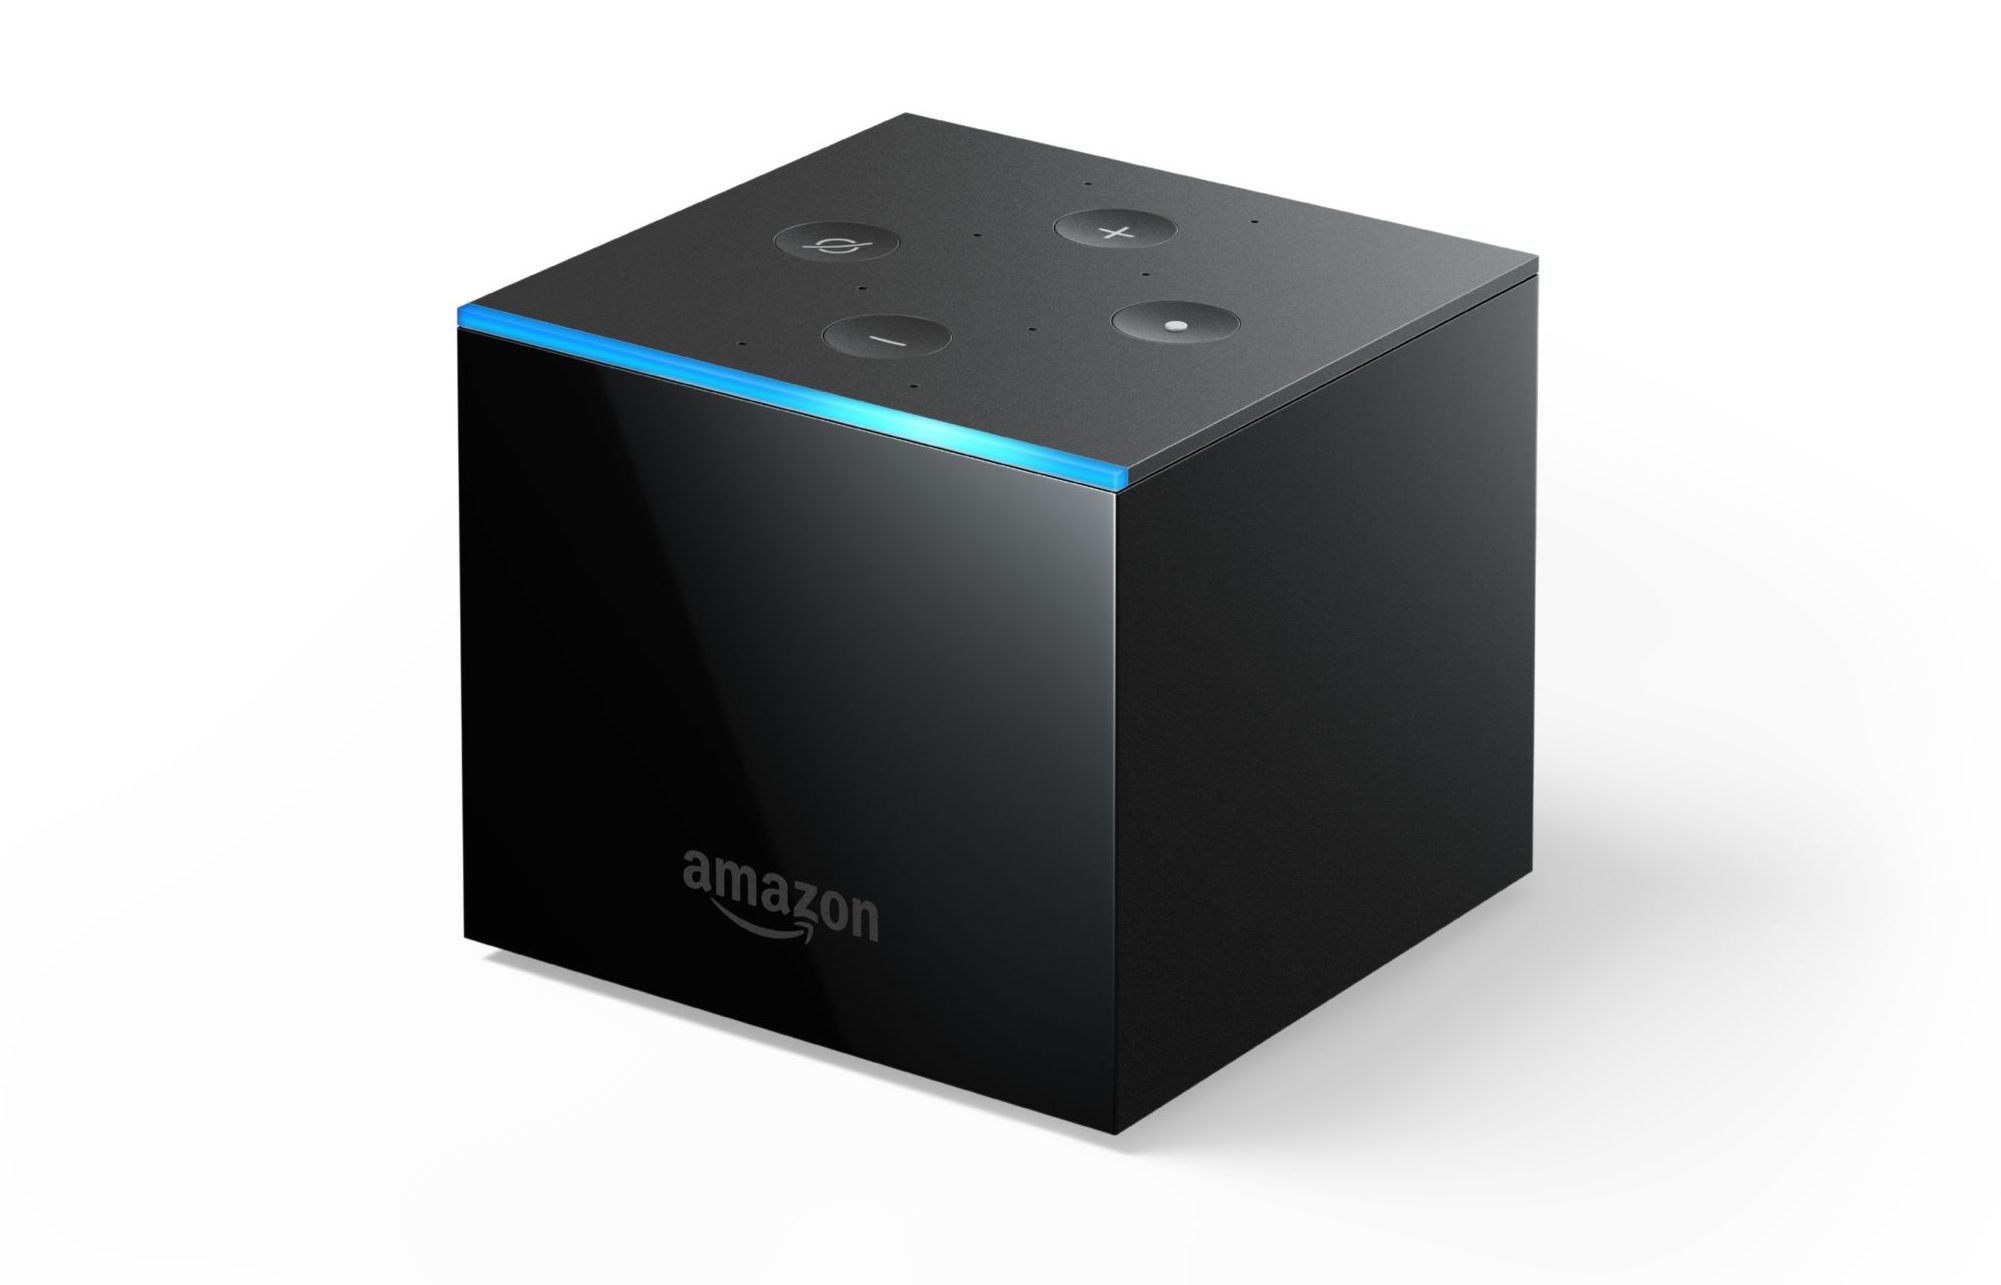 Review: The 2019 Fire TV Cube From Amazon vs The 2018 Fire TV Cube